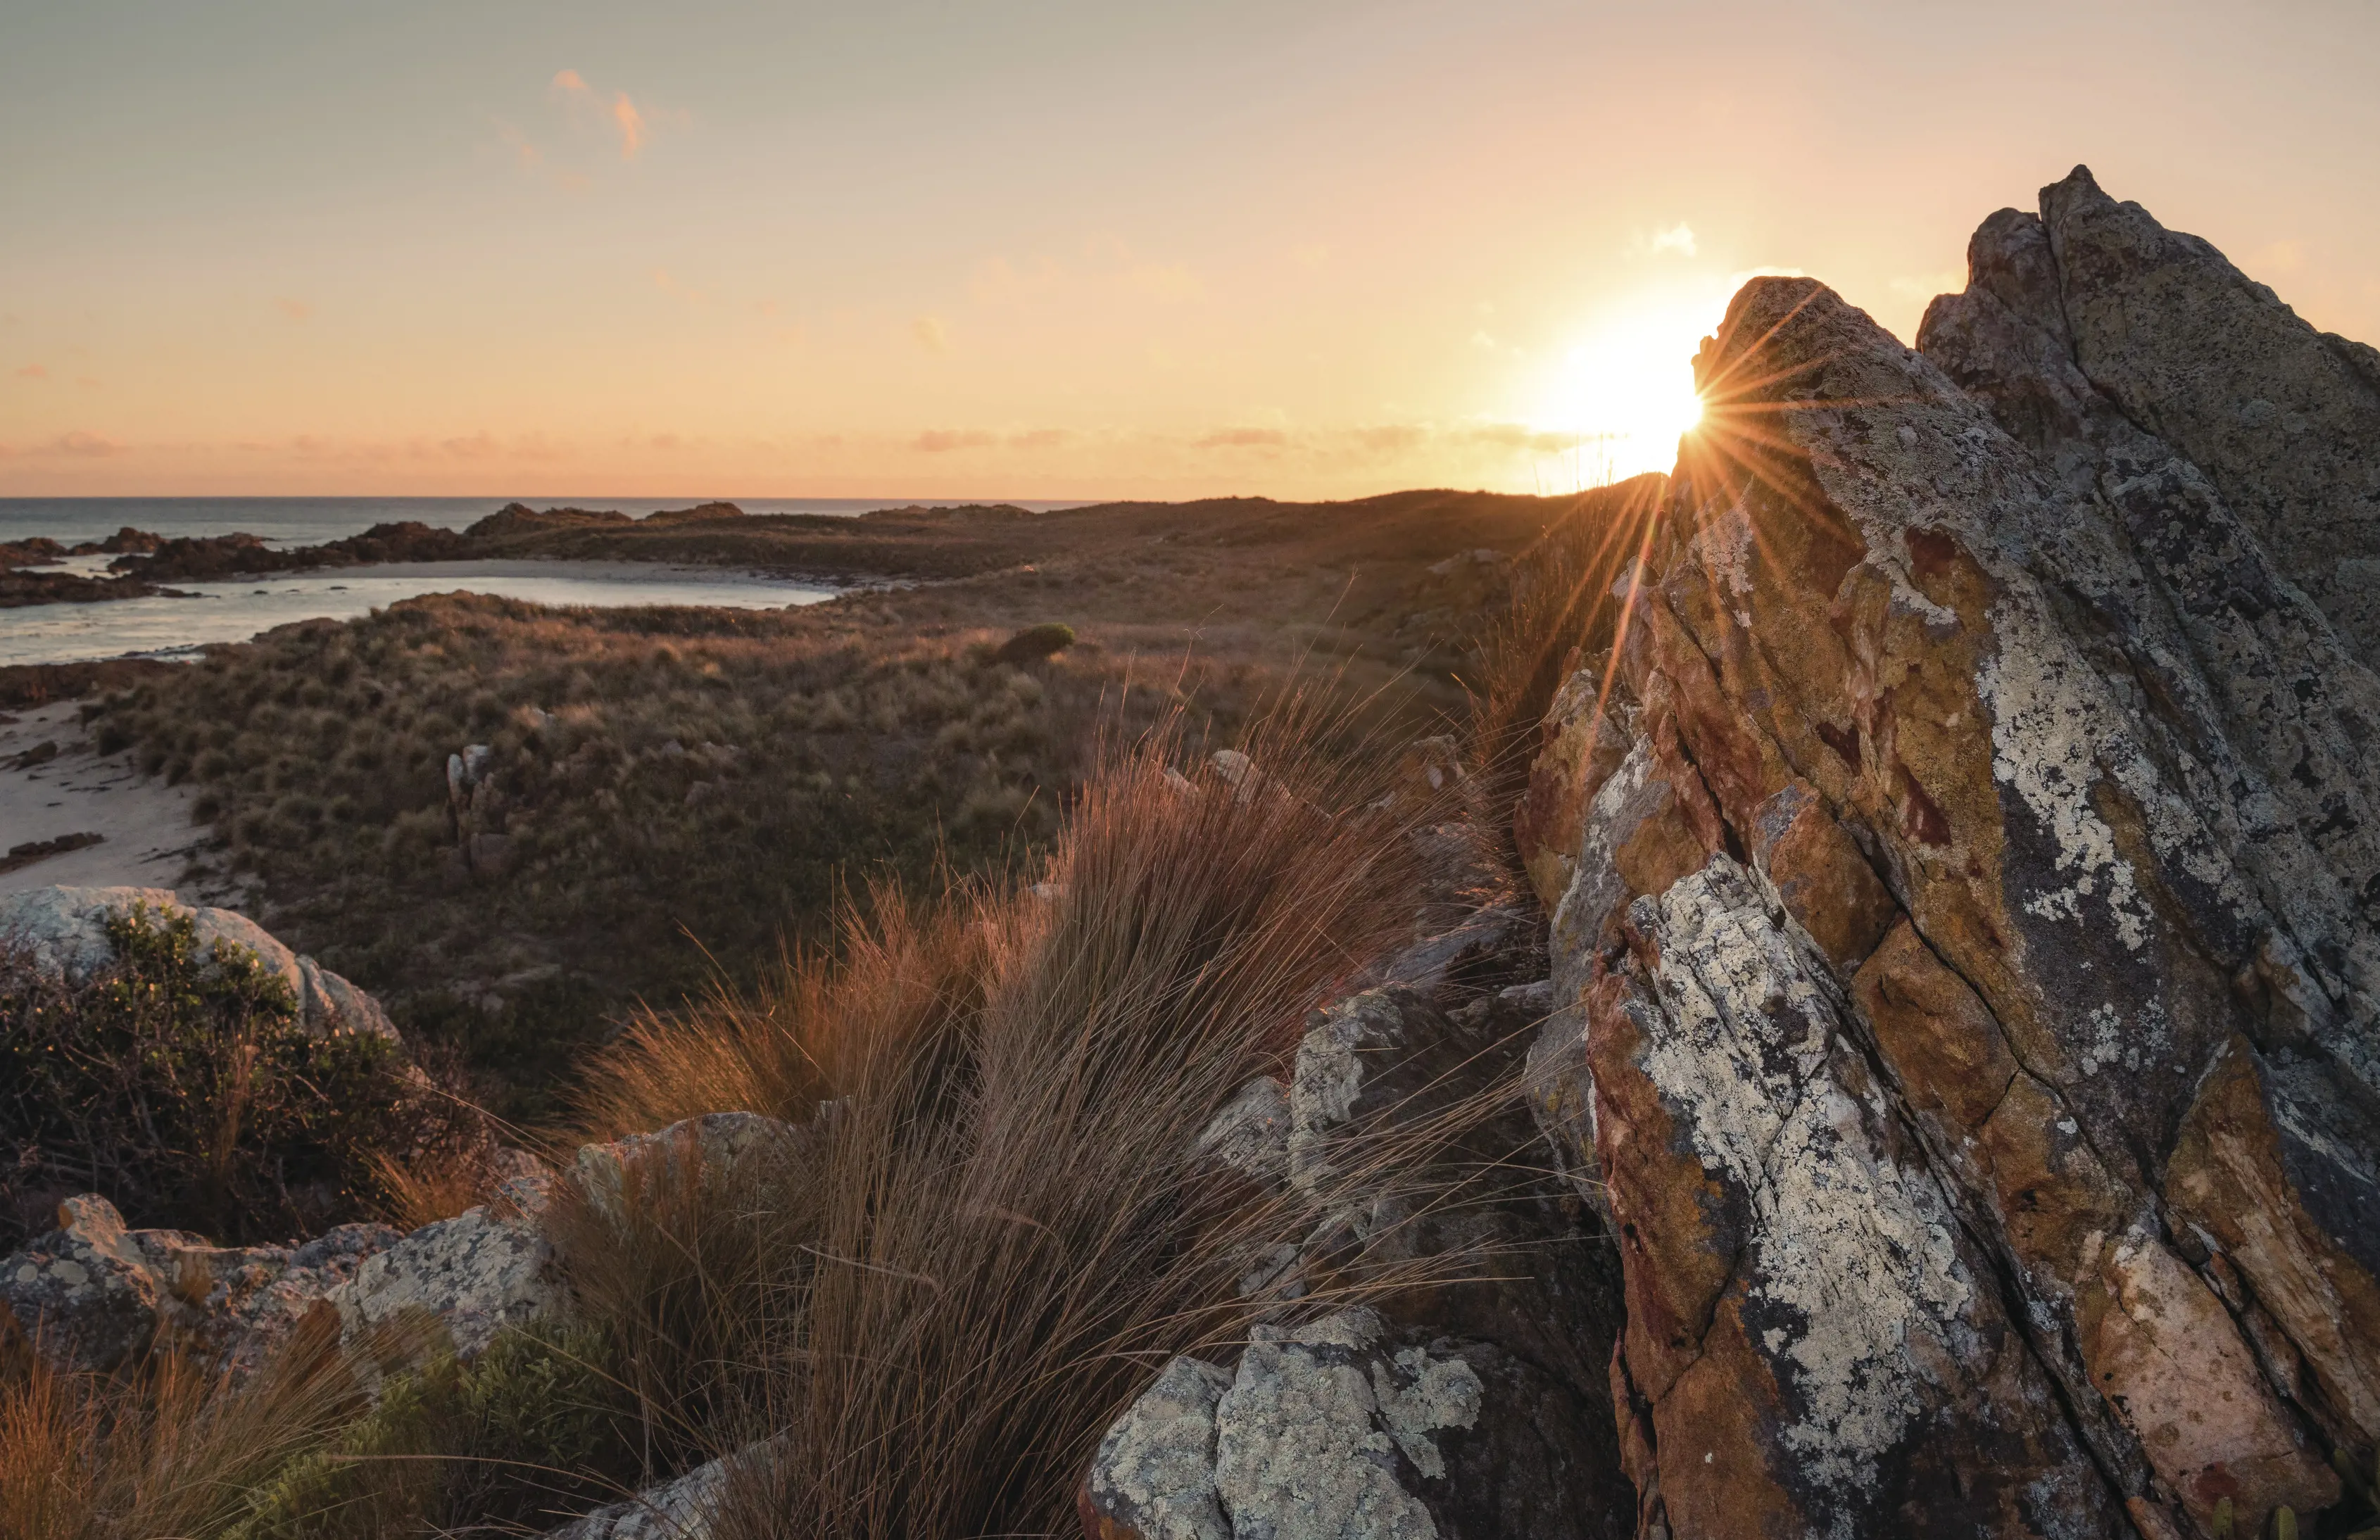 A stunning sunrise fills the Arthur-Pieman Conservation Area. The sun hits the surrounding bushland and rocks in the image.